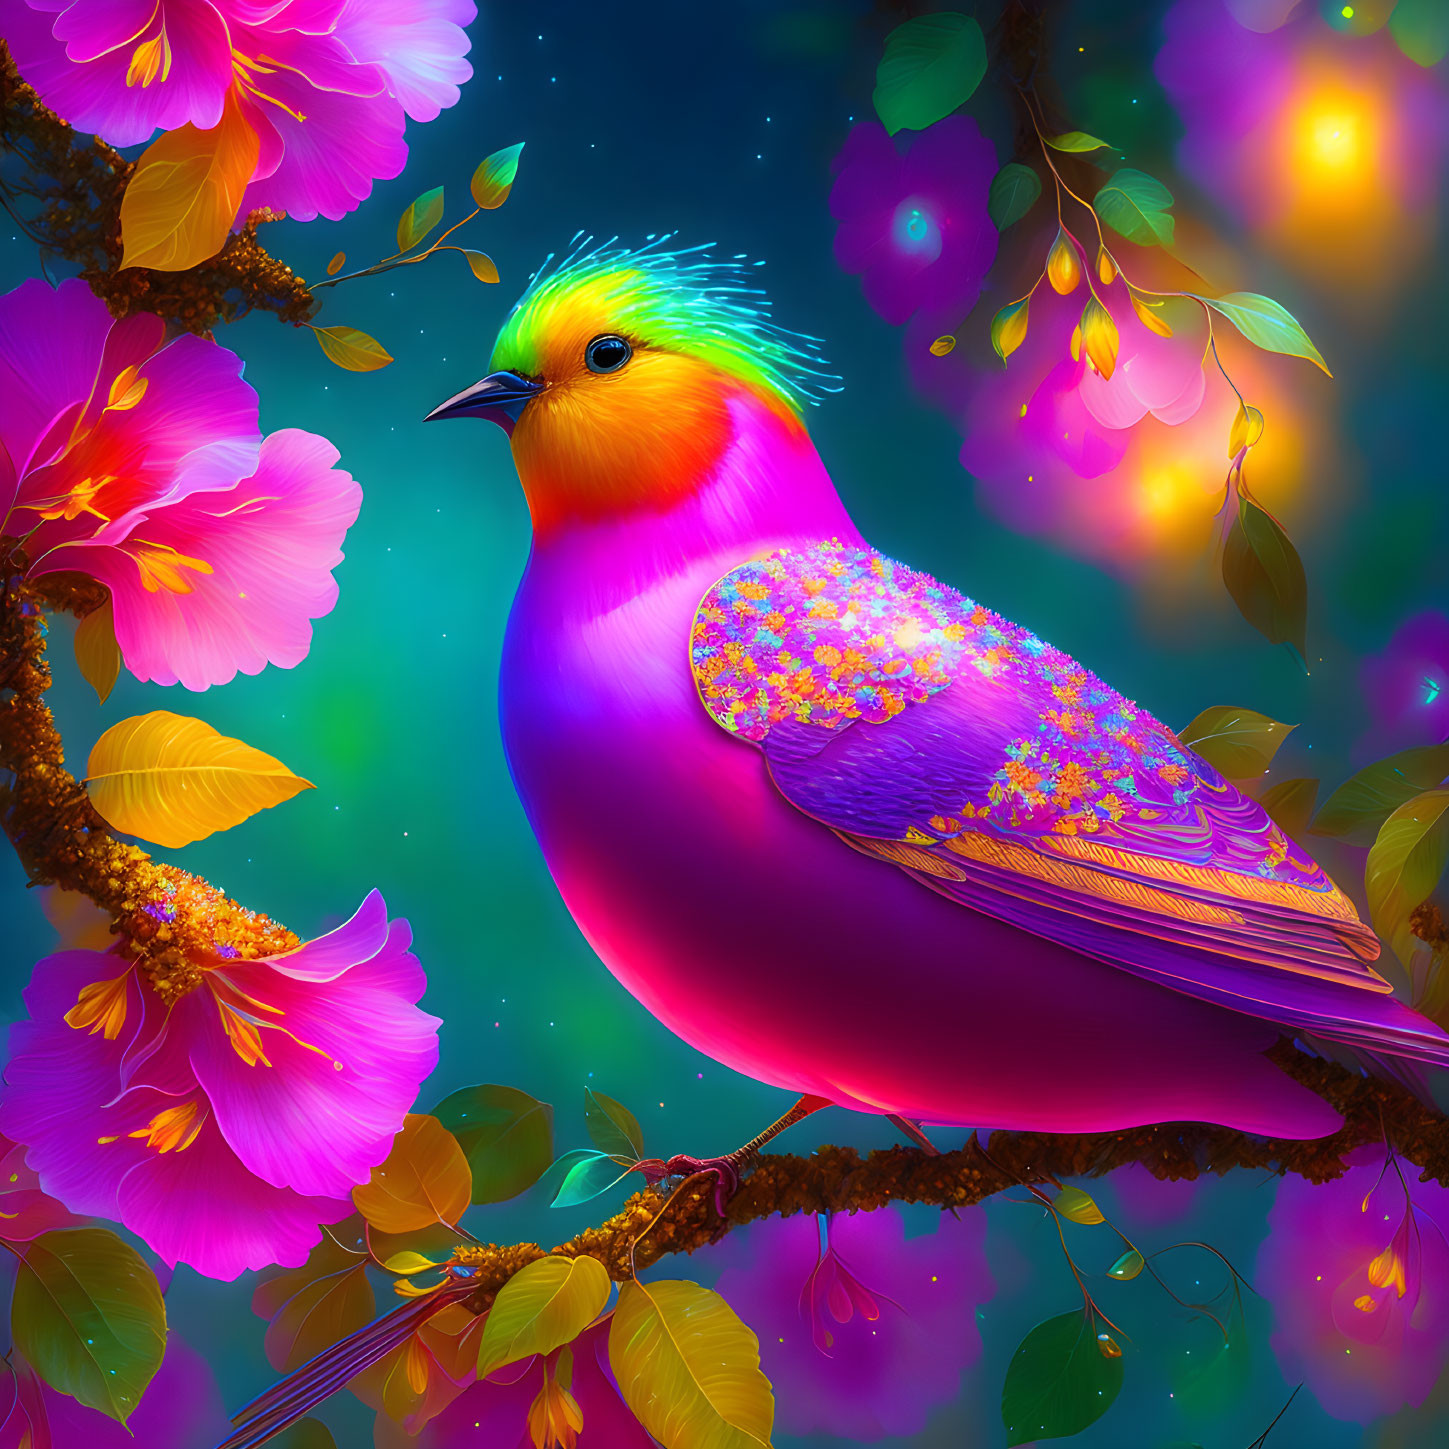 Colorful Bird with Yellow Head and Purple Body Perched Among Pink Blossoms